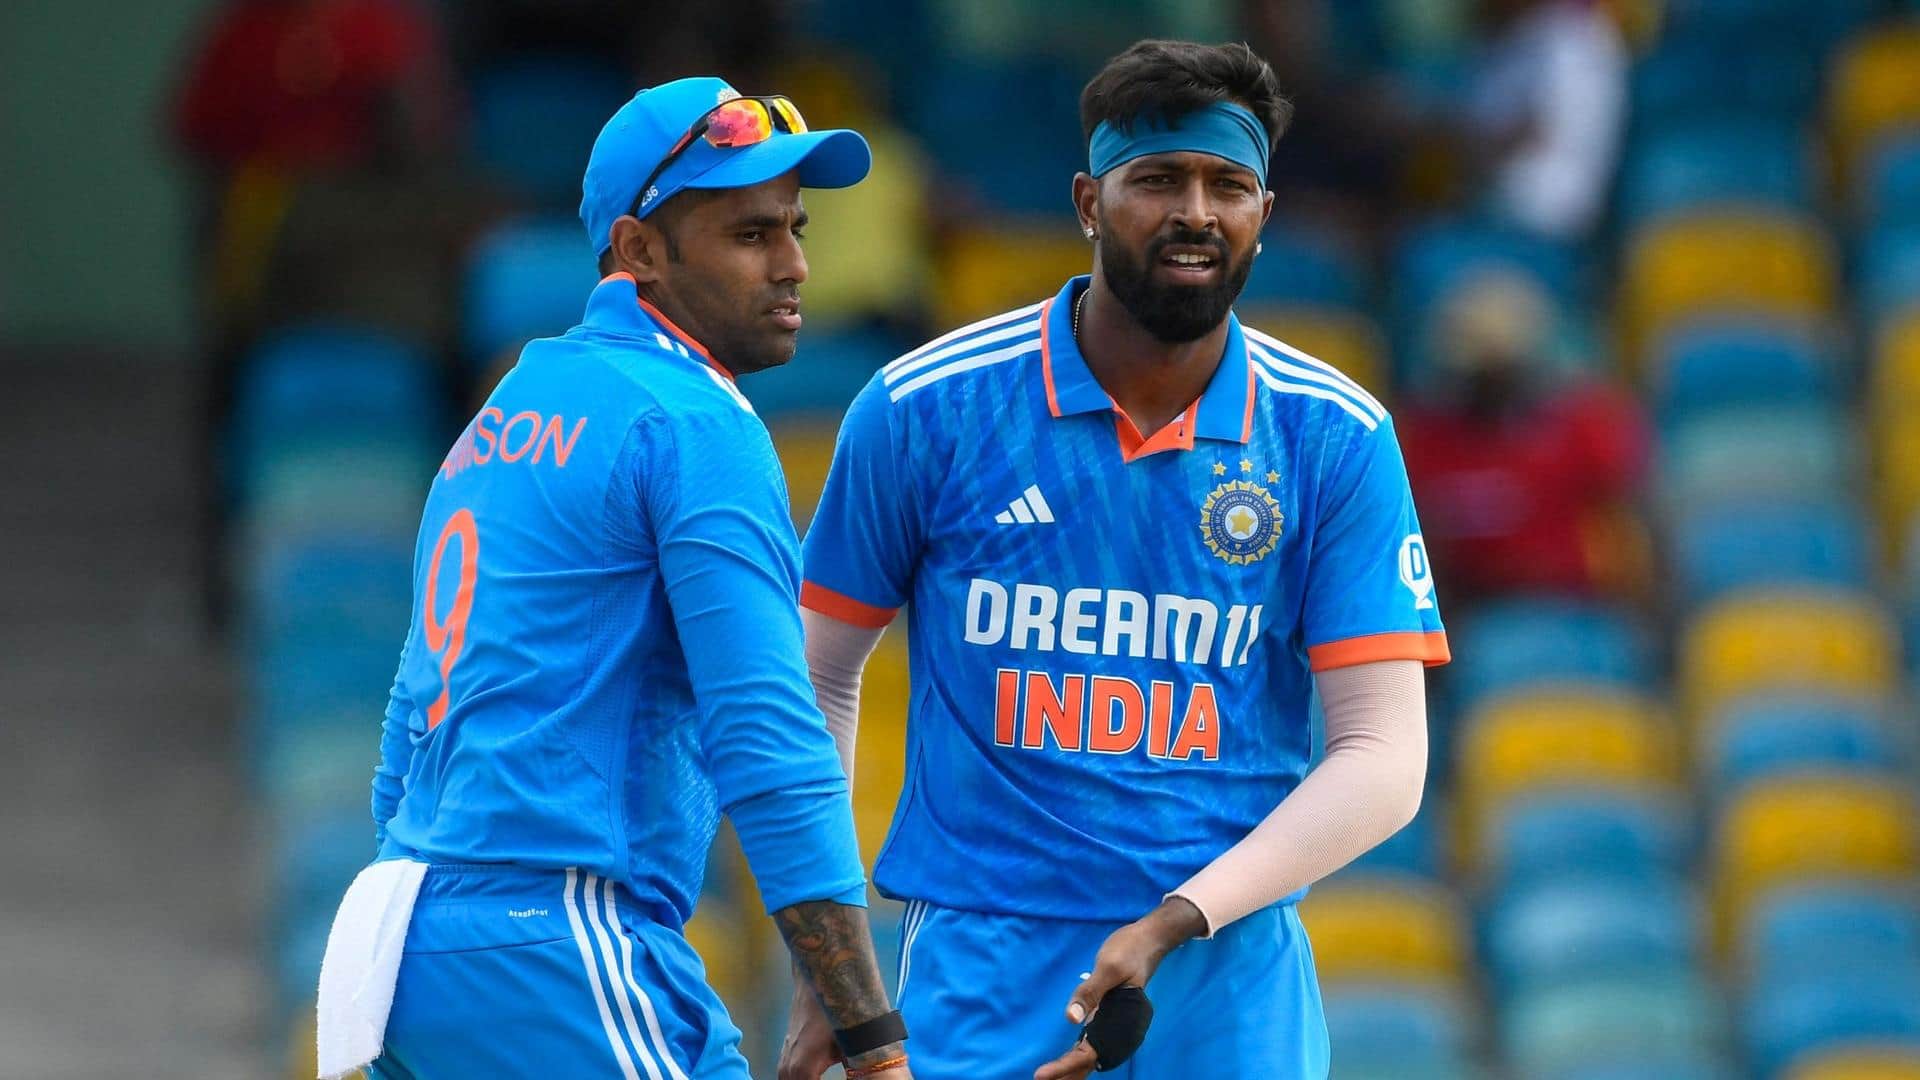 WI vs IND, 1st ODI: Hosts bowled out for 114